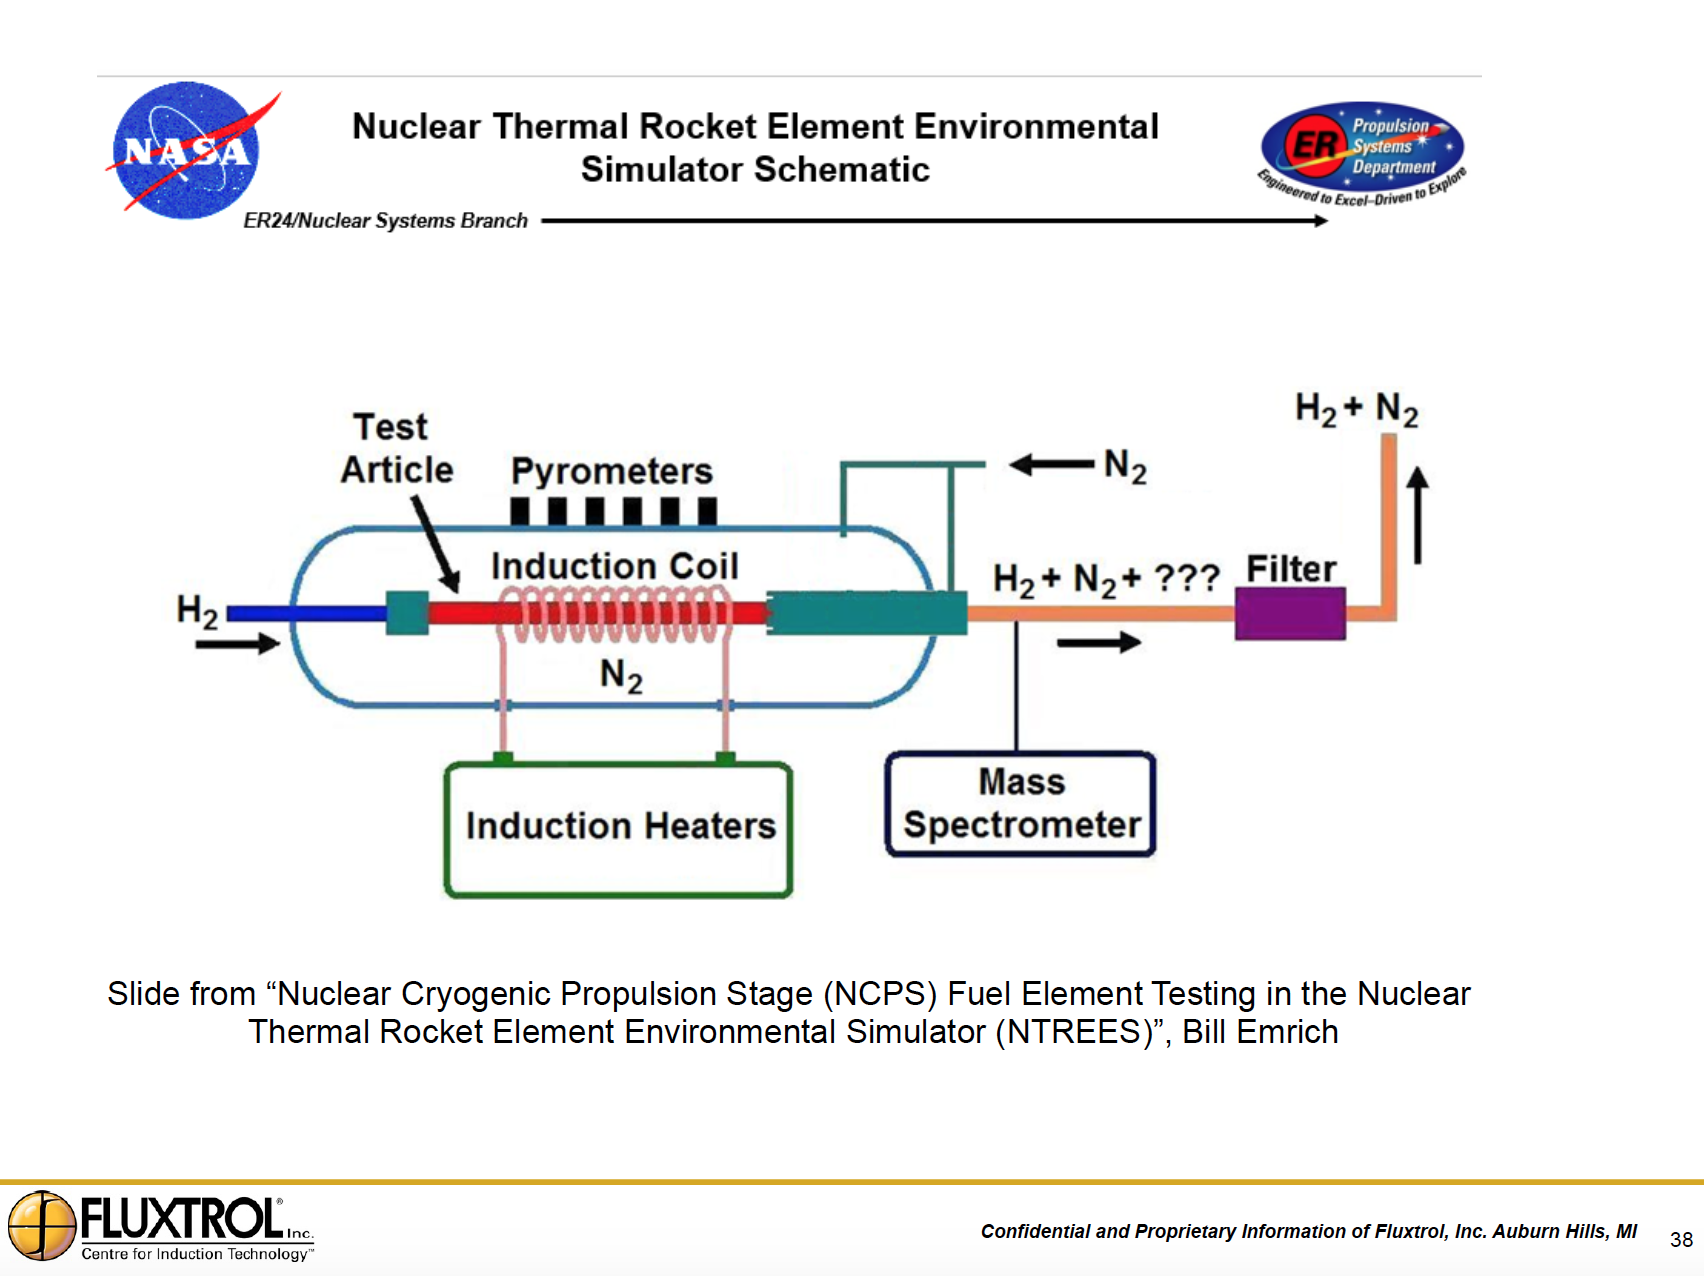 Fluxtrol | Applications of Induction Heating Enabling Advancement in Materials Science Figure 38 - Deep Space Exploration